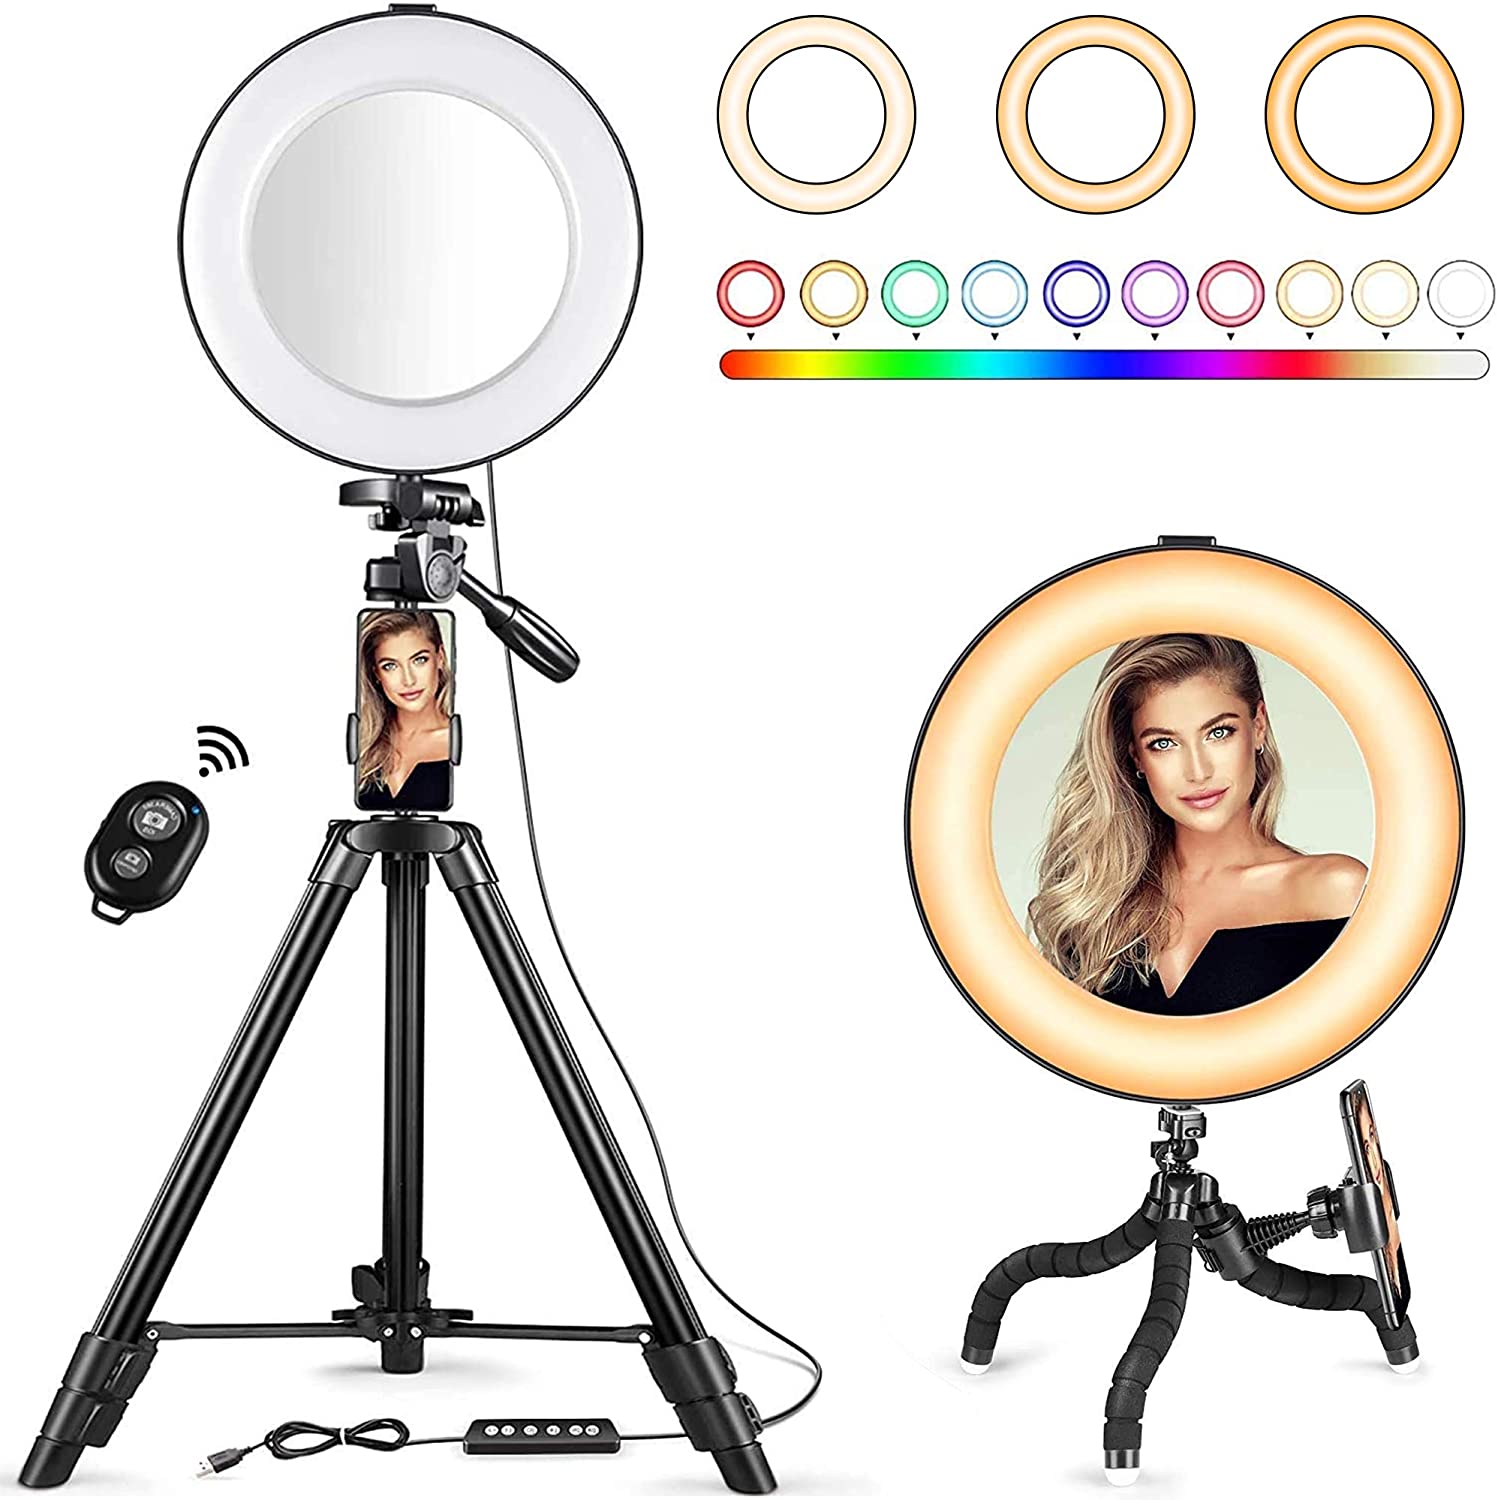 Etekcity 24 (60cm) 5-in-1 Photography Reflector Light Reflectors for  Photography Multi-Disc Photo Reflector Collapsible with Bag - Translucent